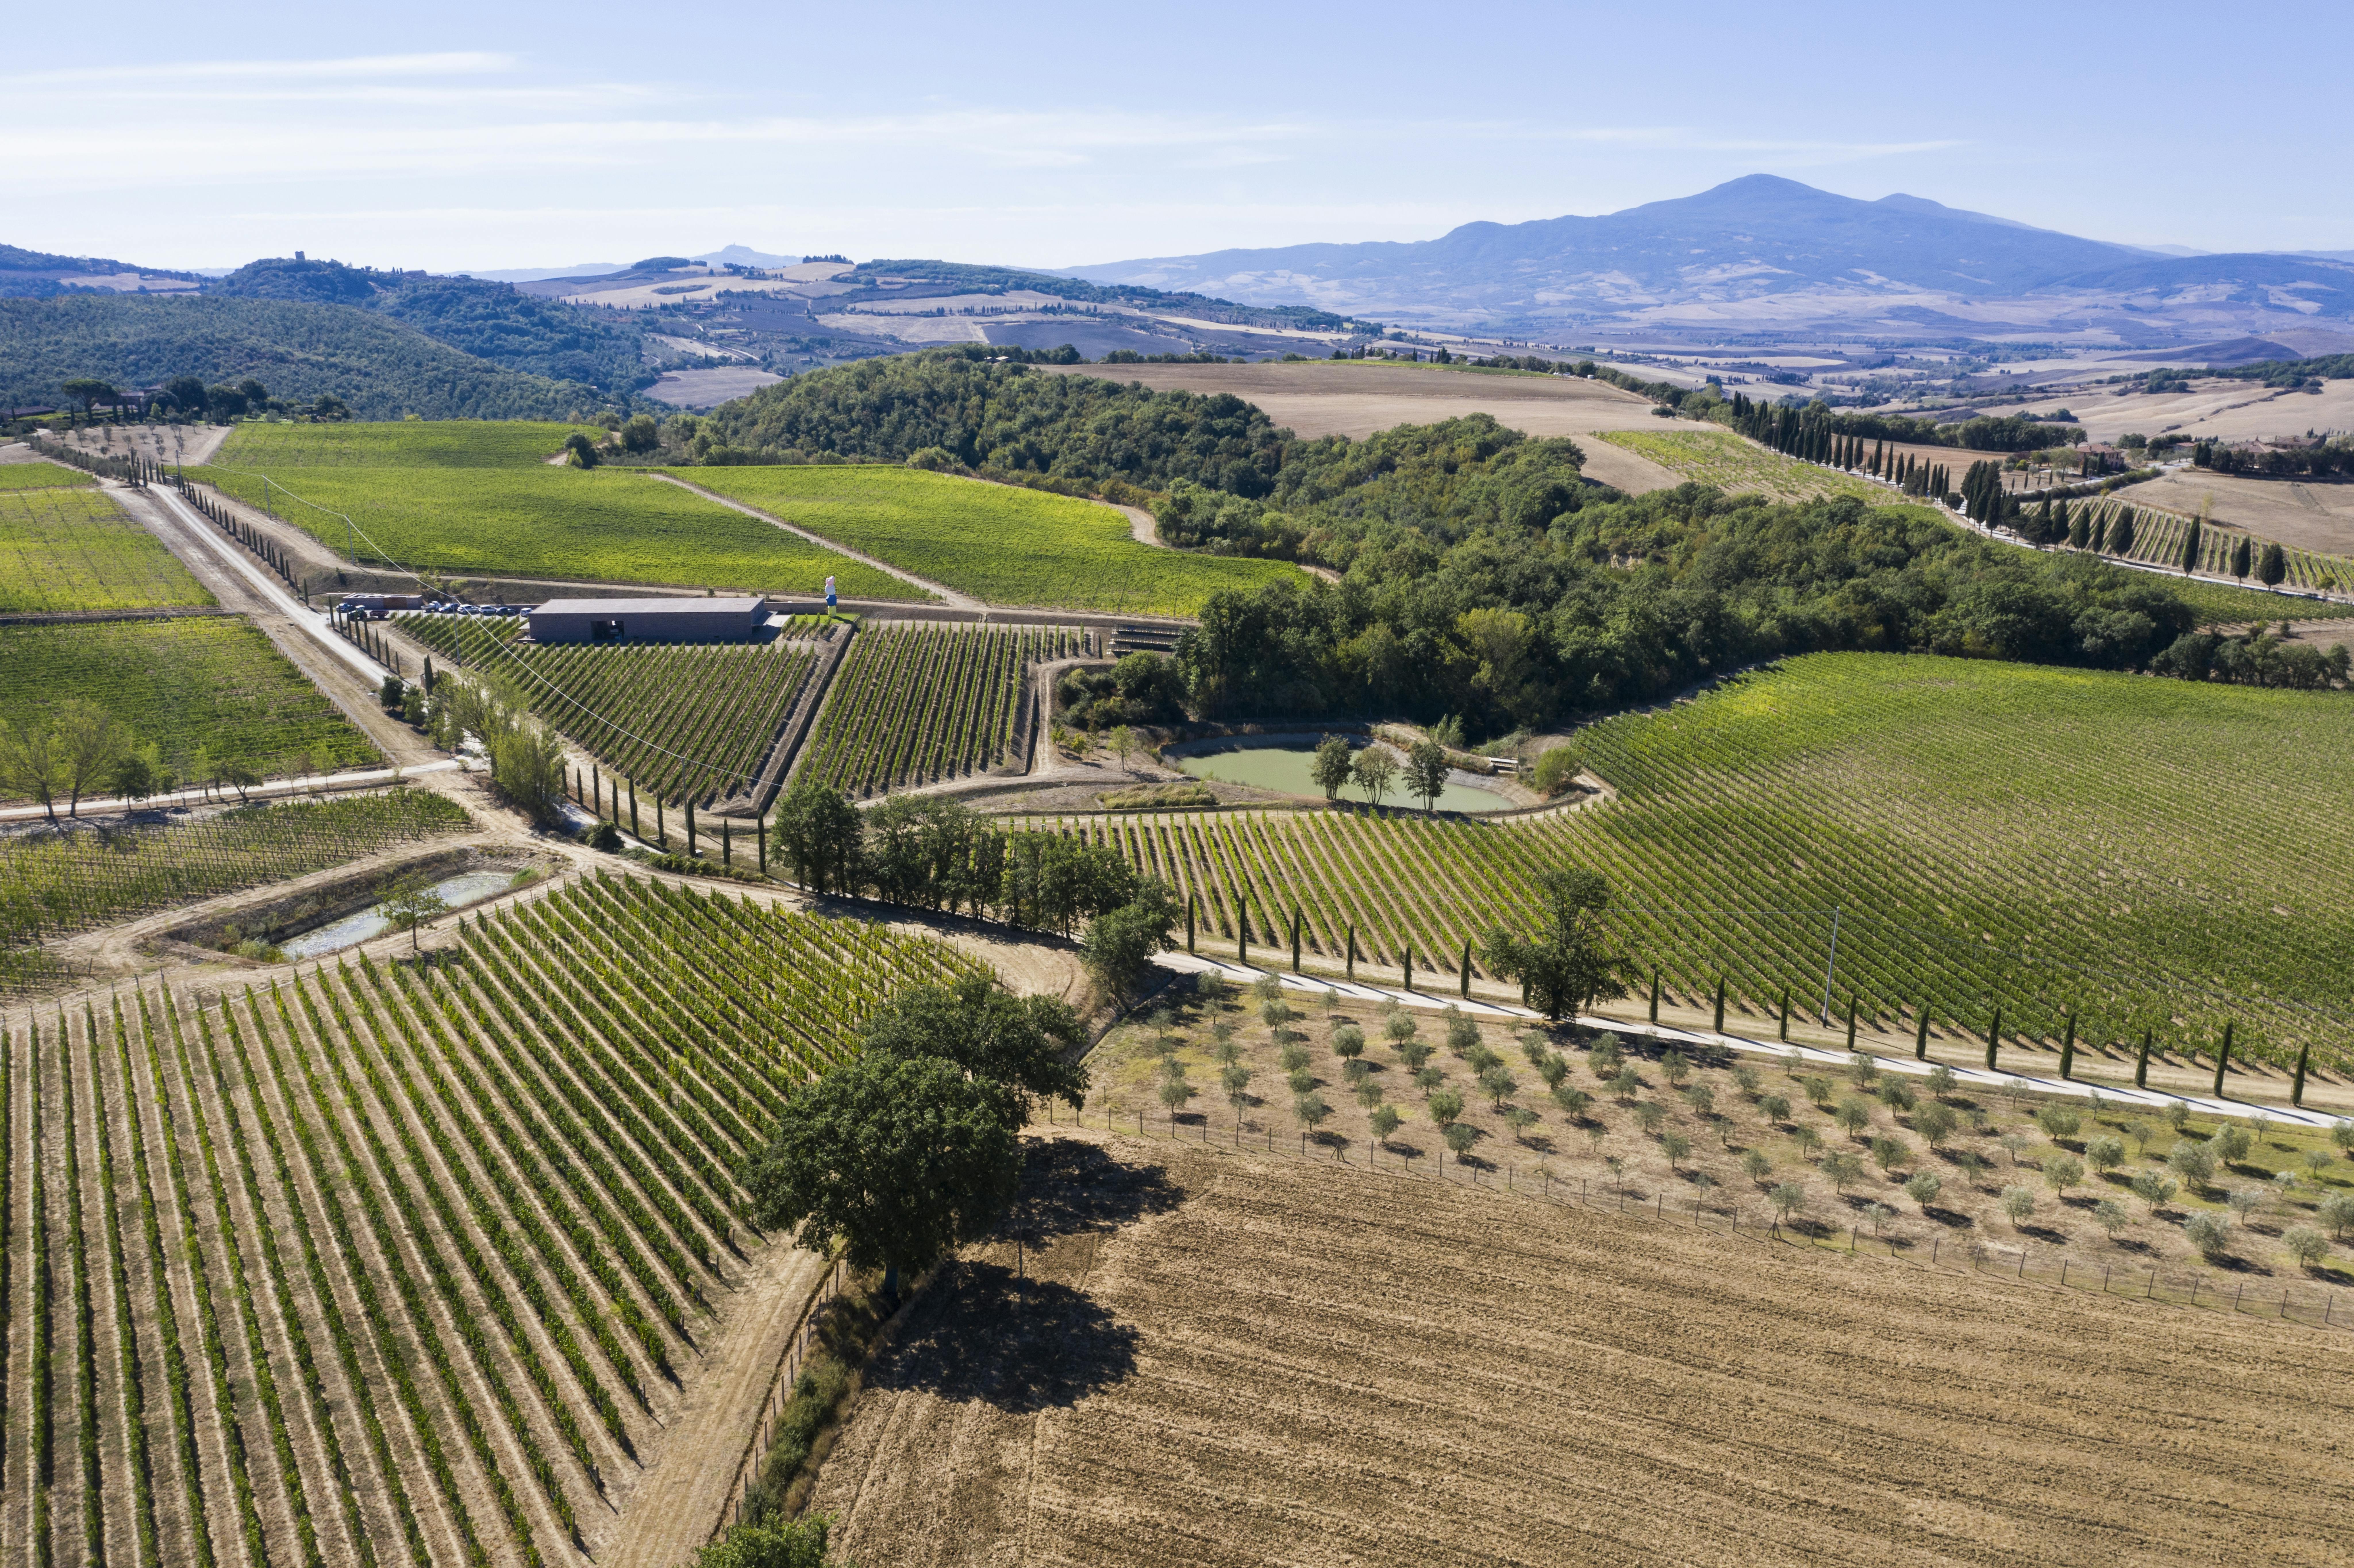 Aerial view by dron on winery vinyards and monte amiata